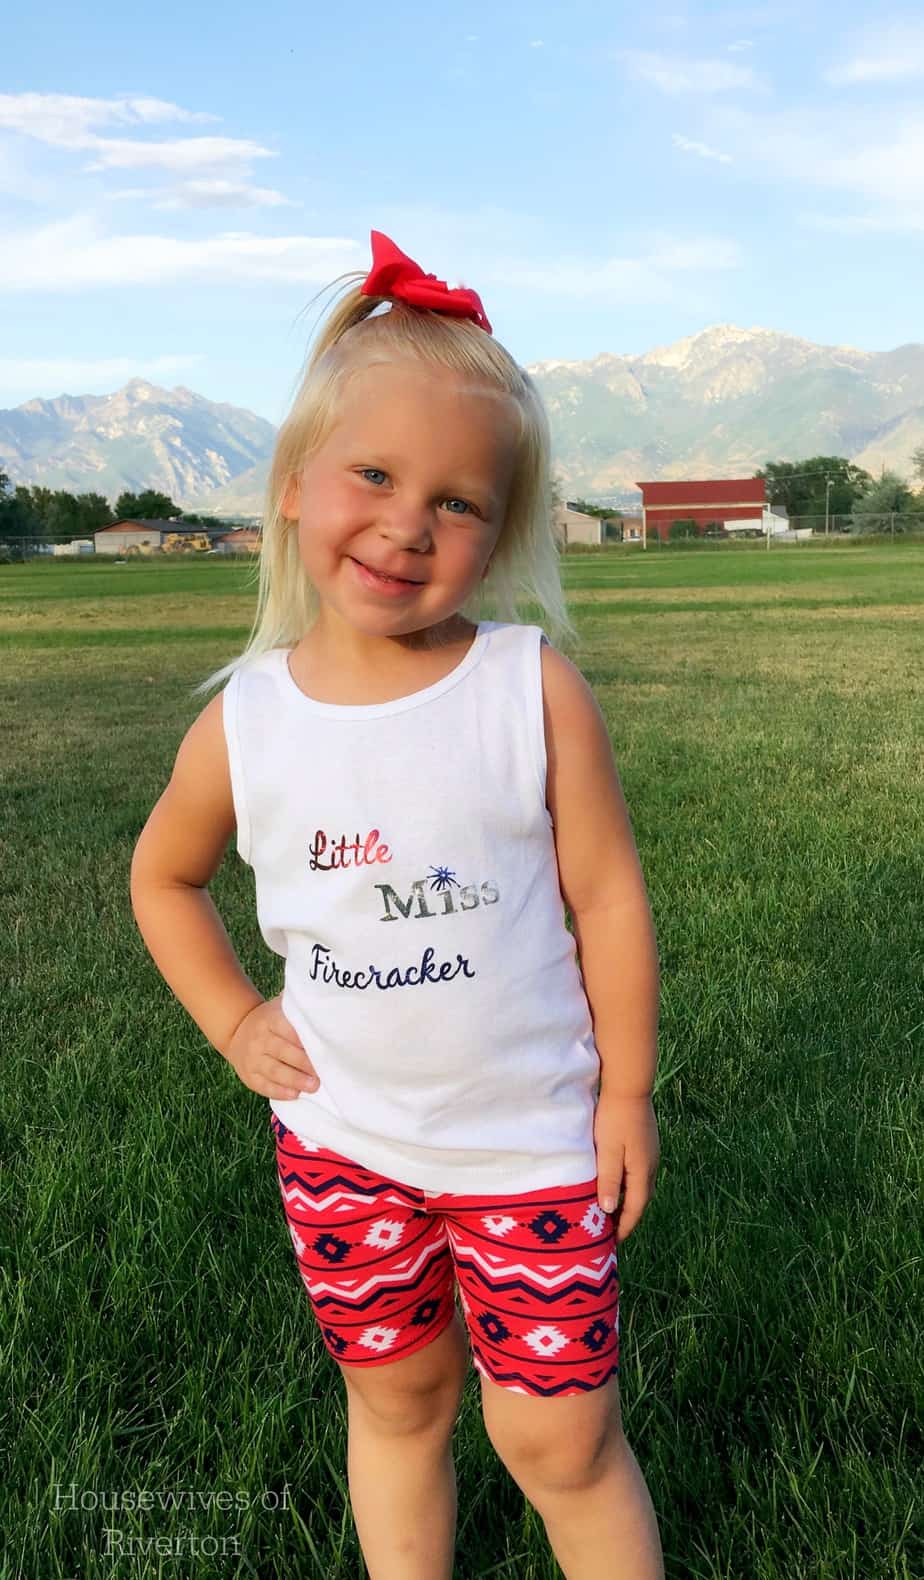 Our DIY Firecracker Shirts using the Cricut Explore Air and Design space are great for fun, 4th of July family outfits! | www.housewivesofriverton.com